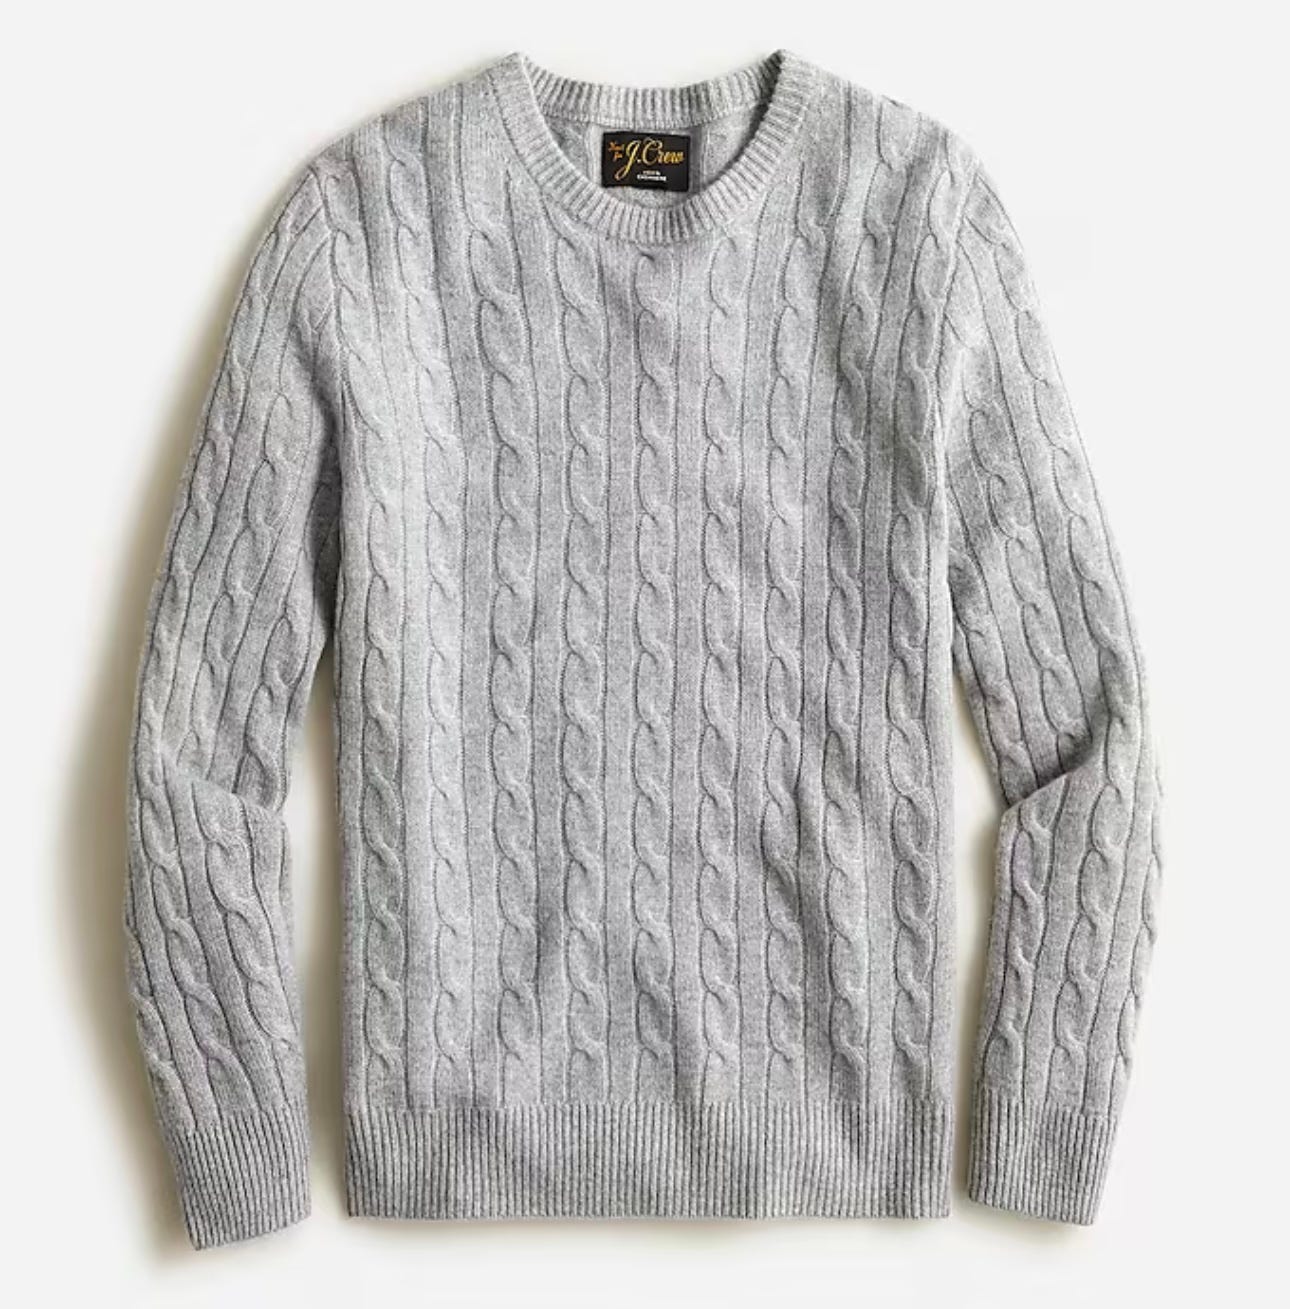 Letter of Rec #060: Great sweaters now